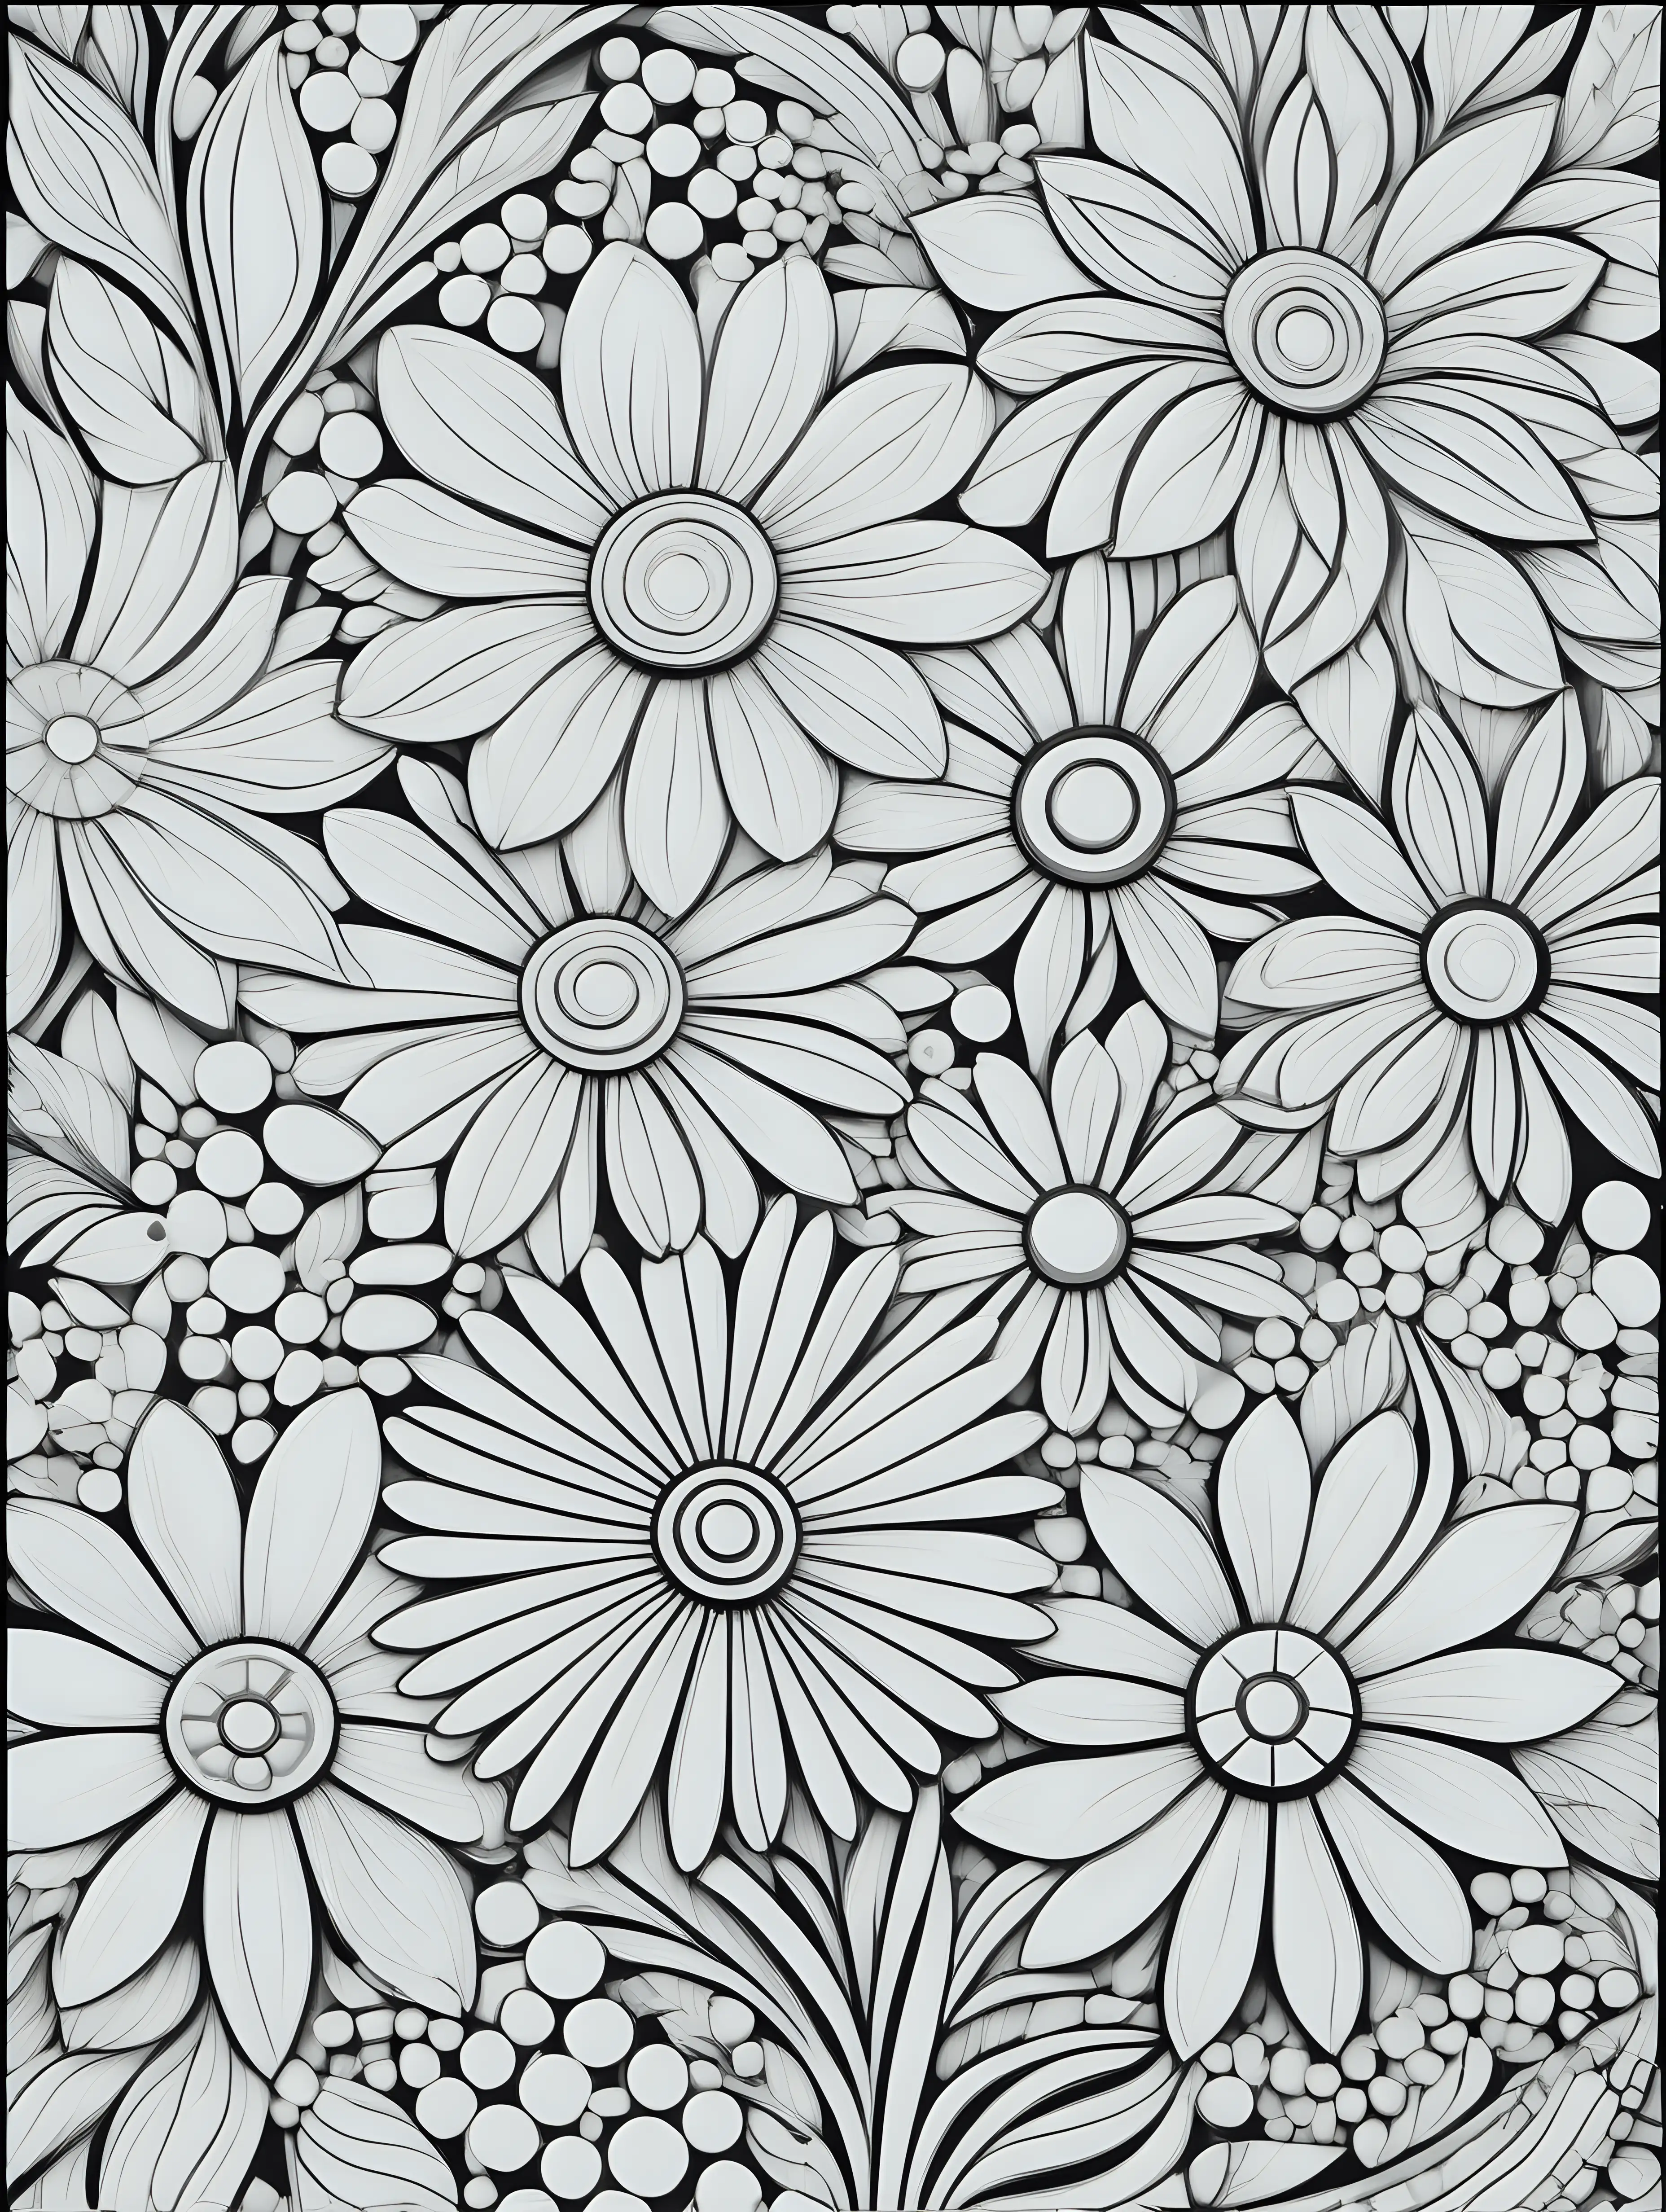 Mosaic Flowers Coloring Page with Thick Lines Intricate Floral Pattern Design for Coloring